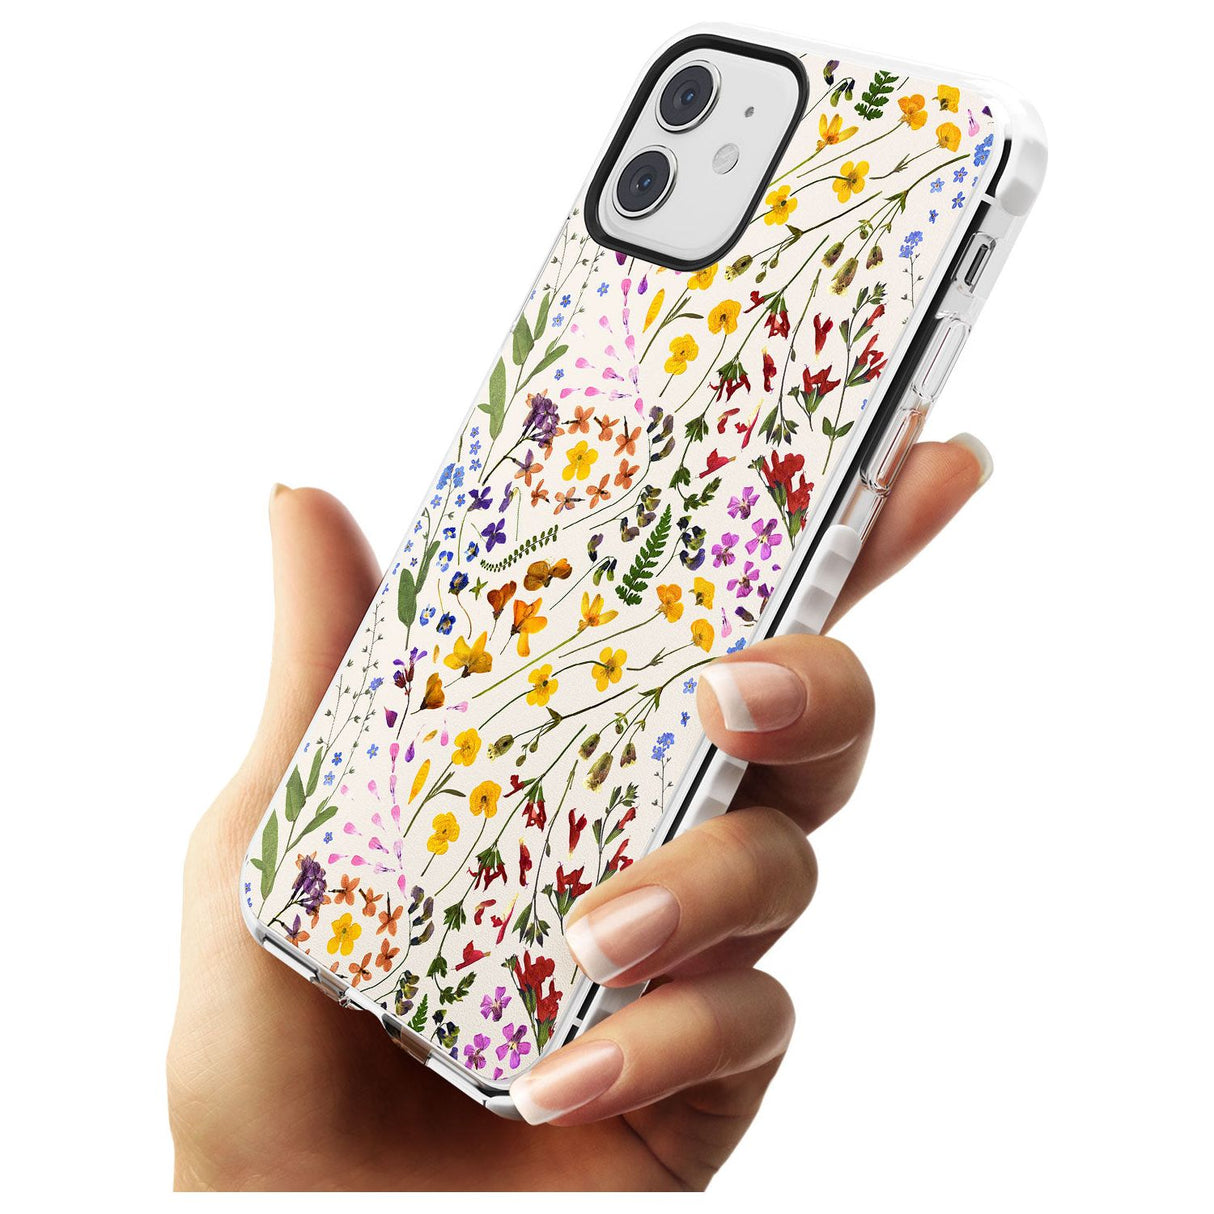 Wildflower & Leaves Cluster Design - Cream Impact Phone Case for iPhone 11